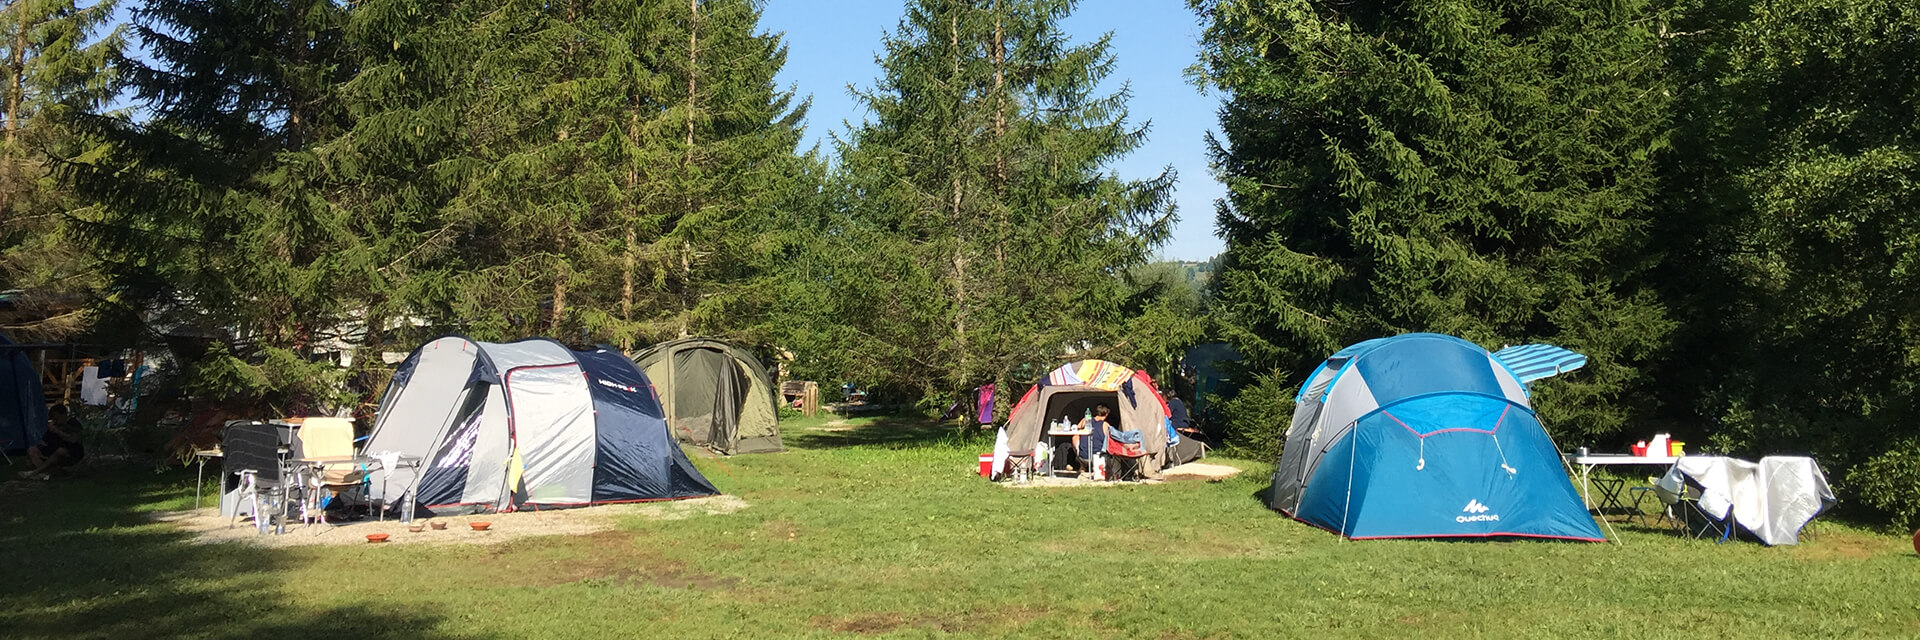 Pitches for tents at Le Mont Grêle campsite in Savoy, in a rural and green setting